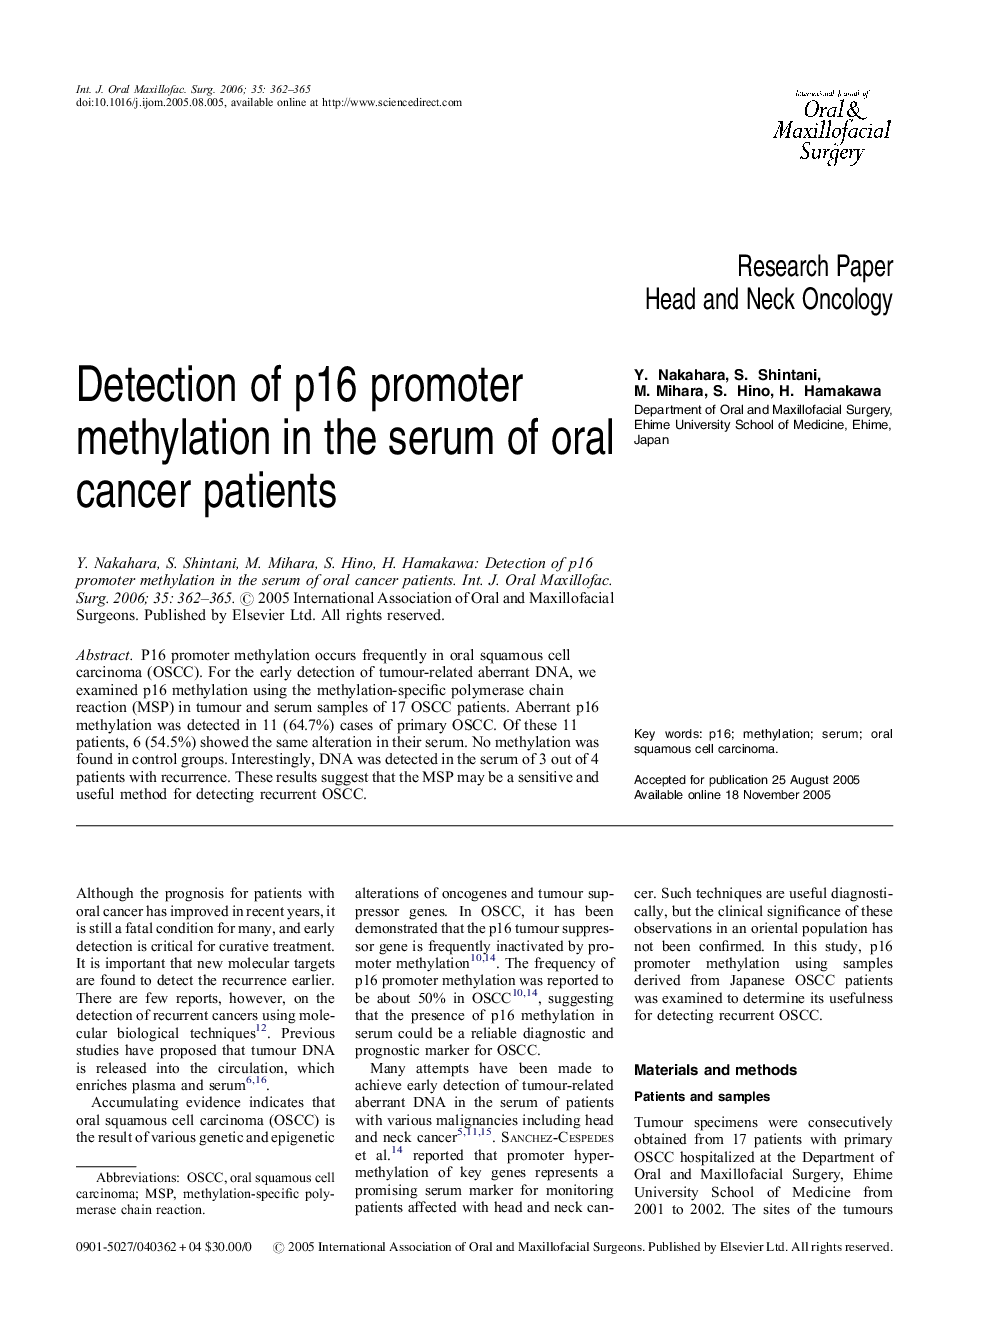 Detection of p16 promoter methylation in the serum of oral cancer patients